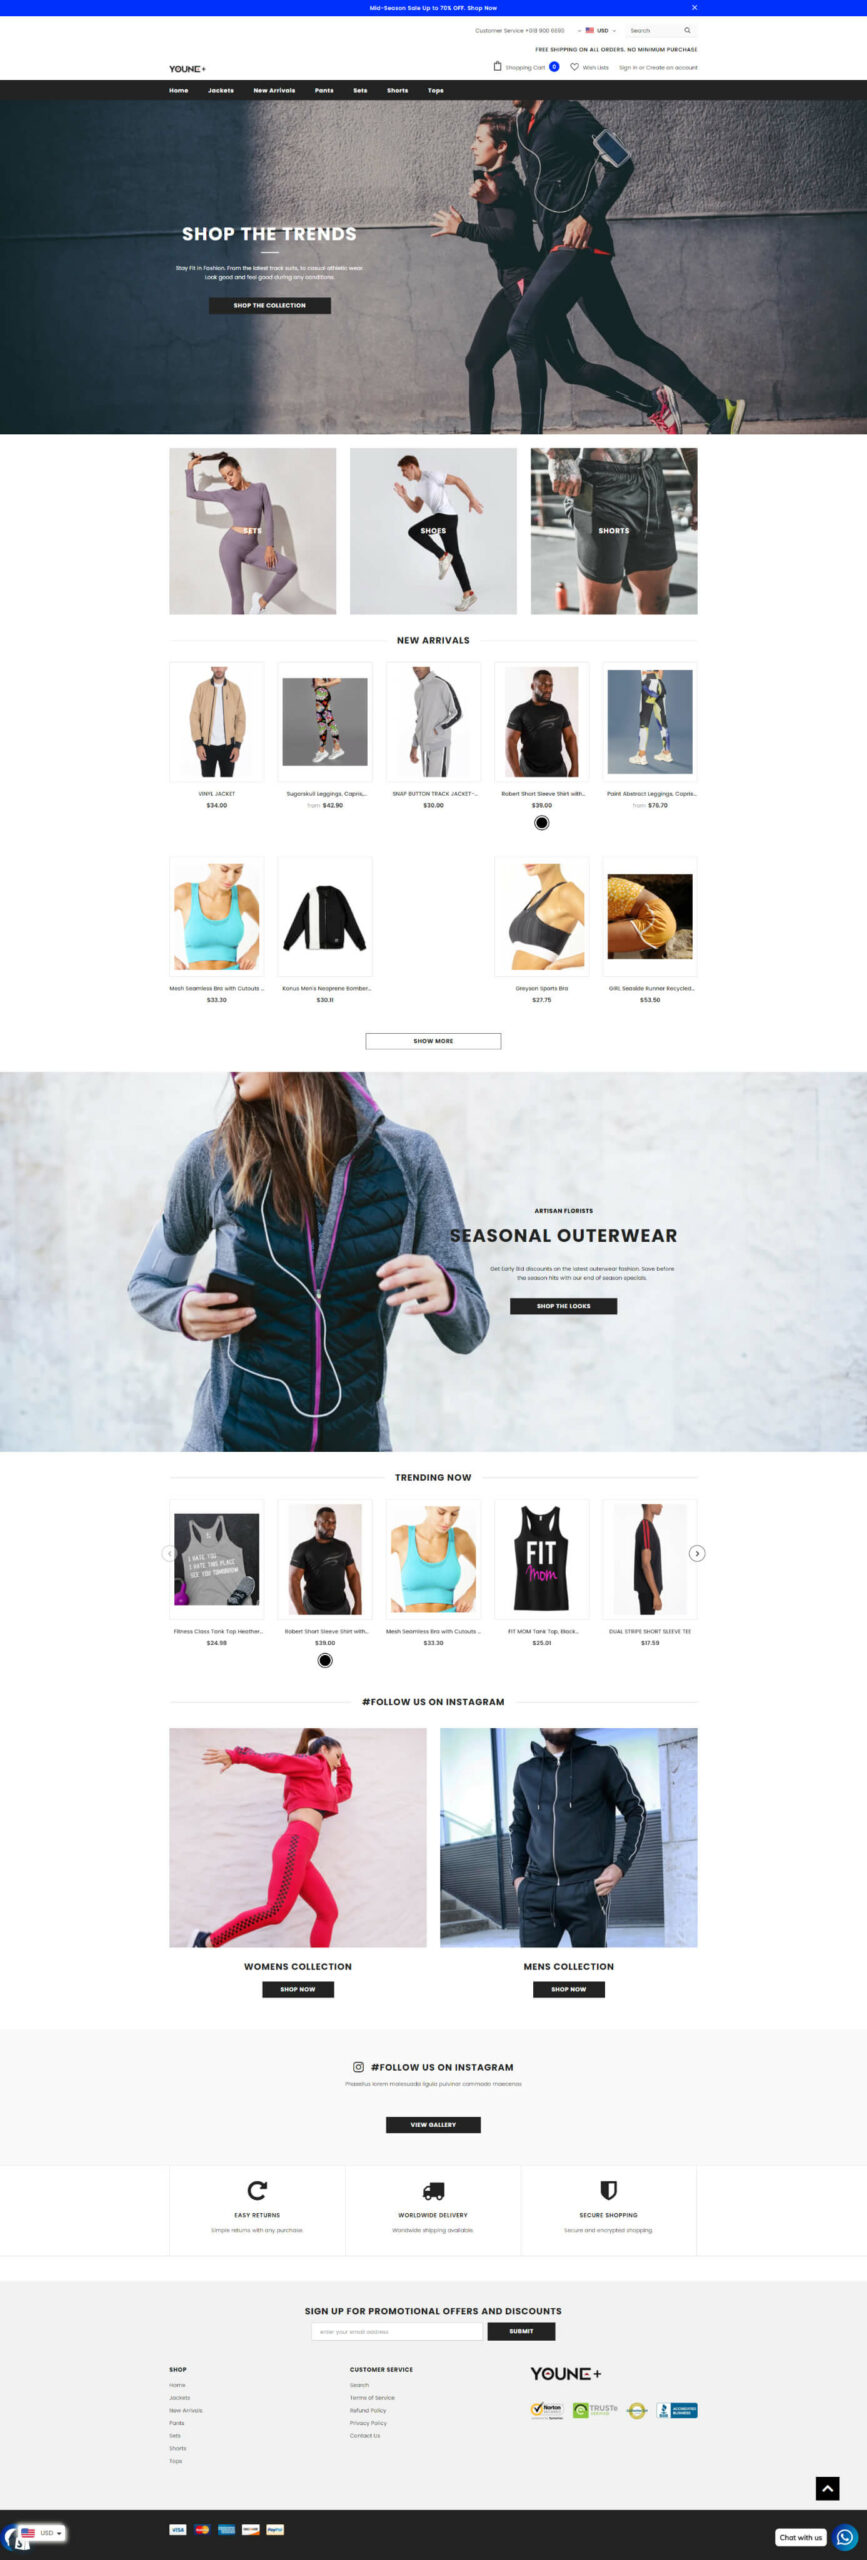 screencapture dropship sprout activewear1 myshopify 2021 09 19 17 49 35 scaled